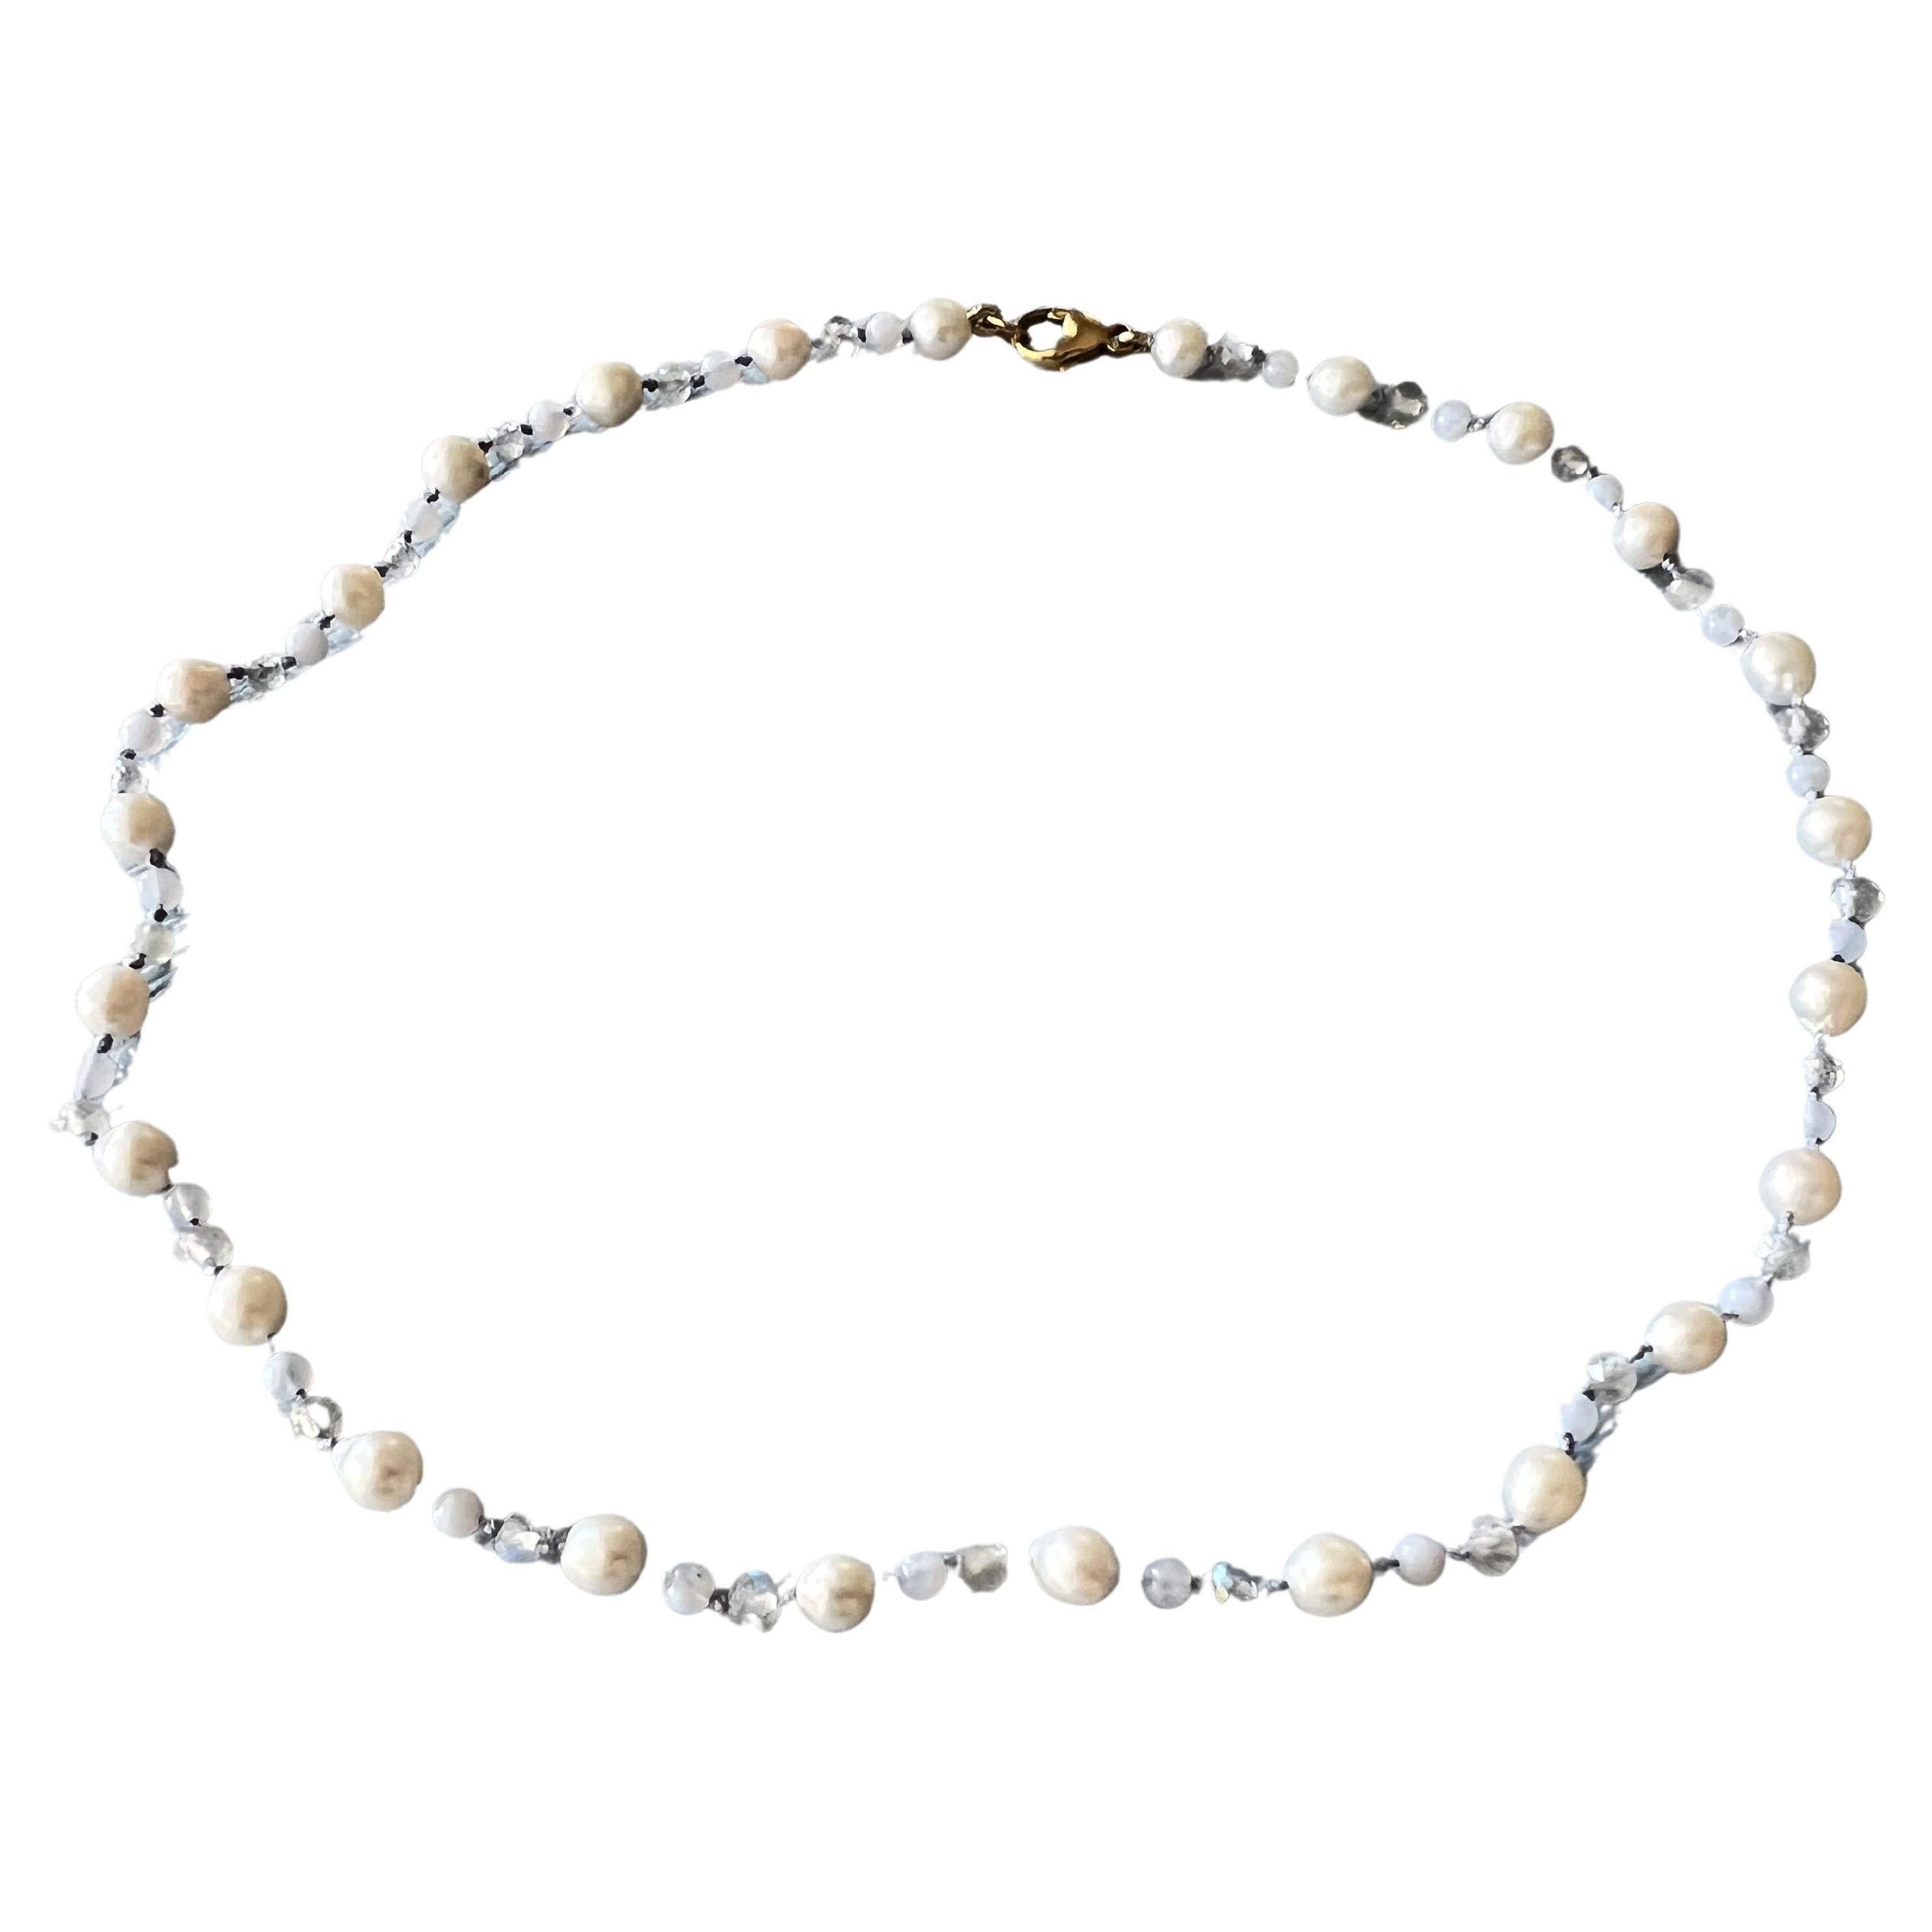 White Pearl, Labradorite, and Blue Lace Agate Choker Necklace with Gold Filled Clasp

Designer: J Dauphin

Length: Necklace 16